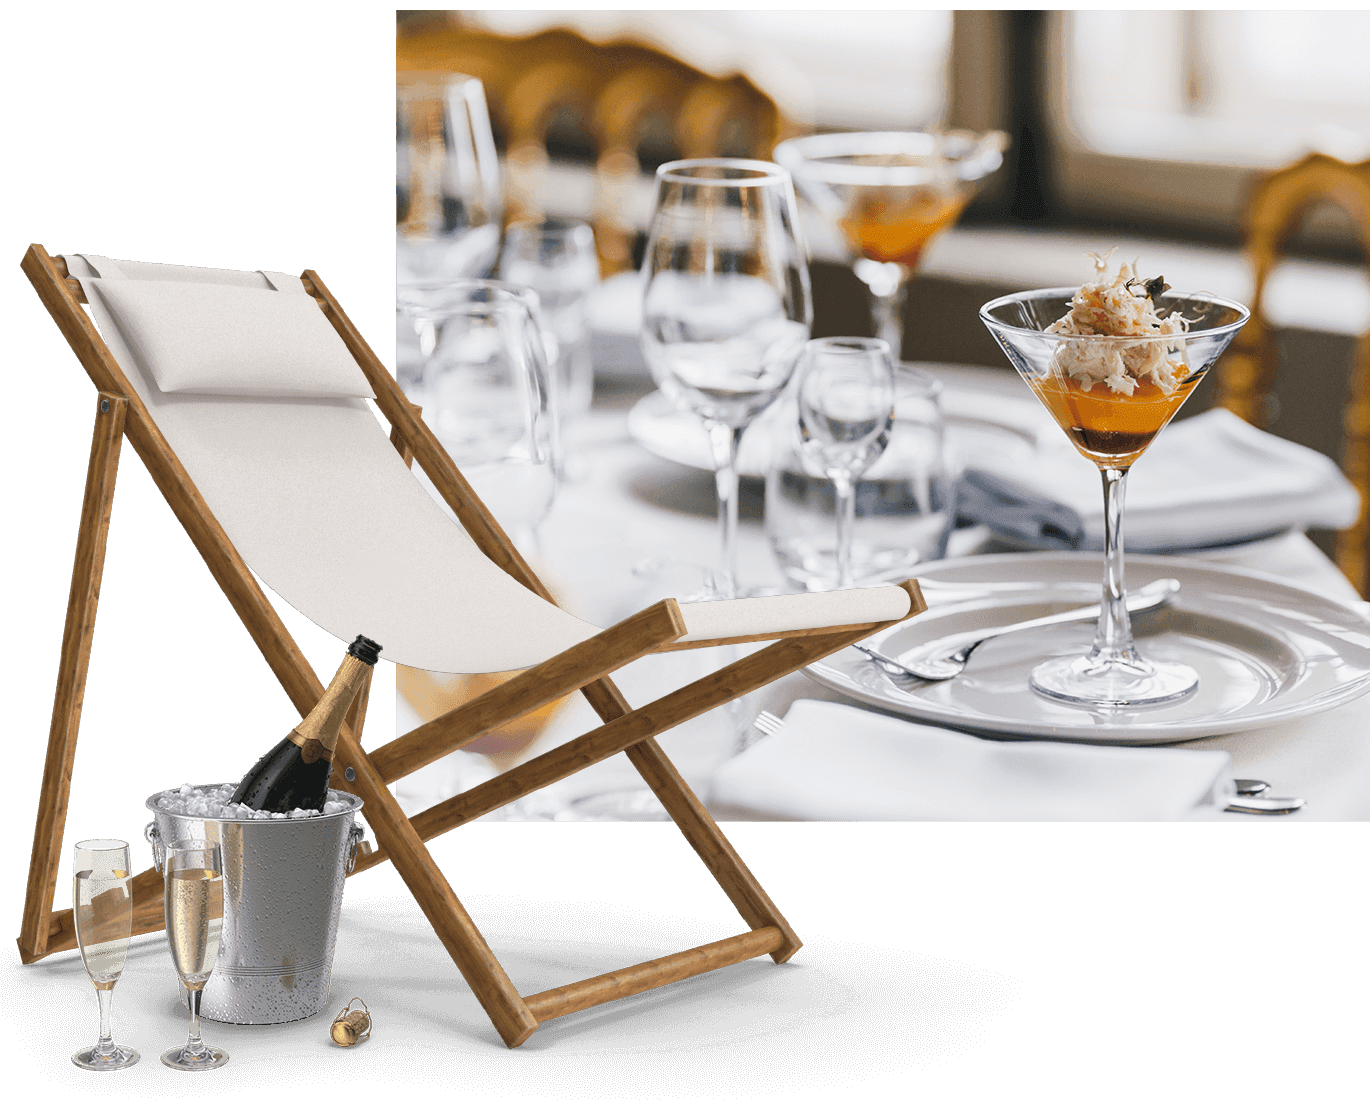 Luxury dining and deck chair image